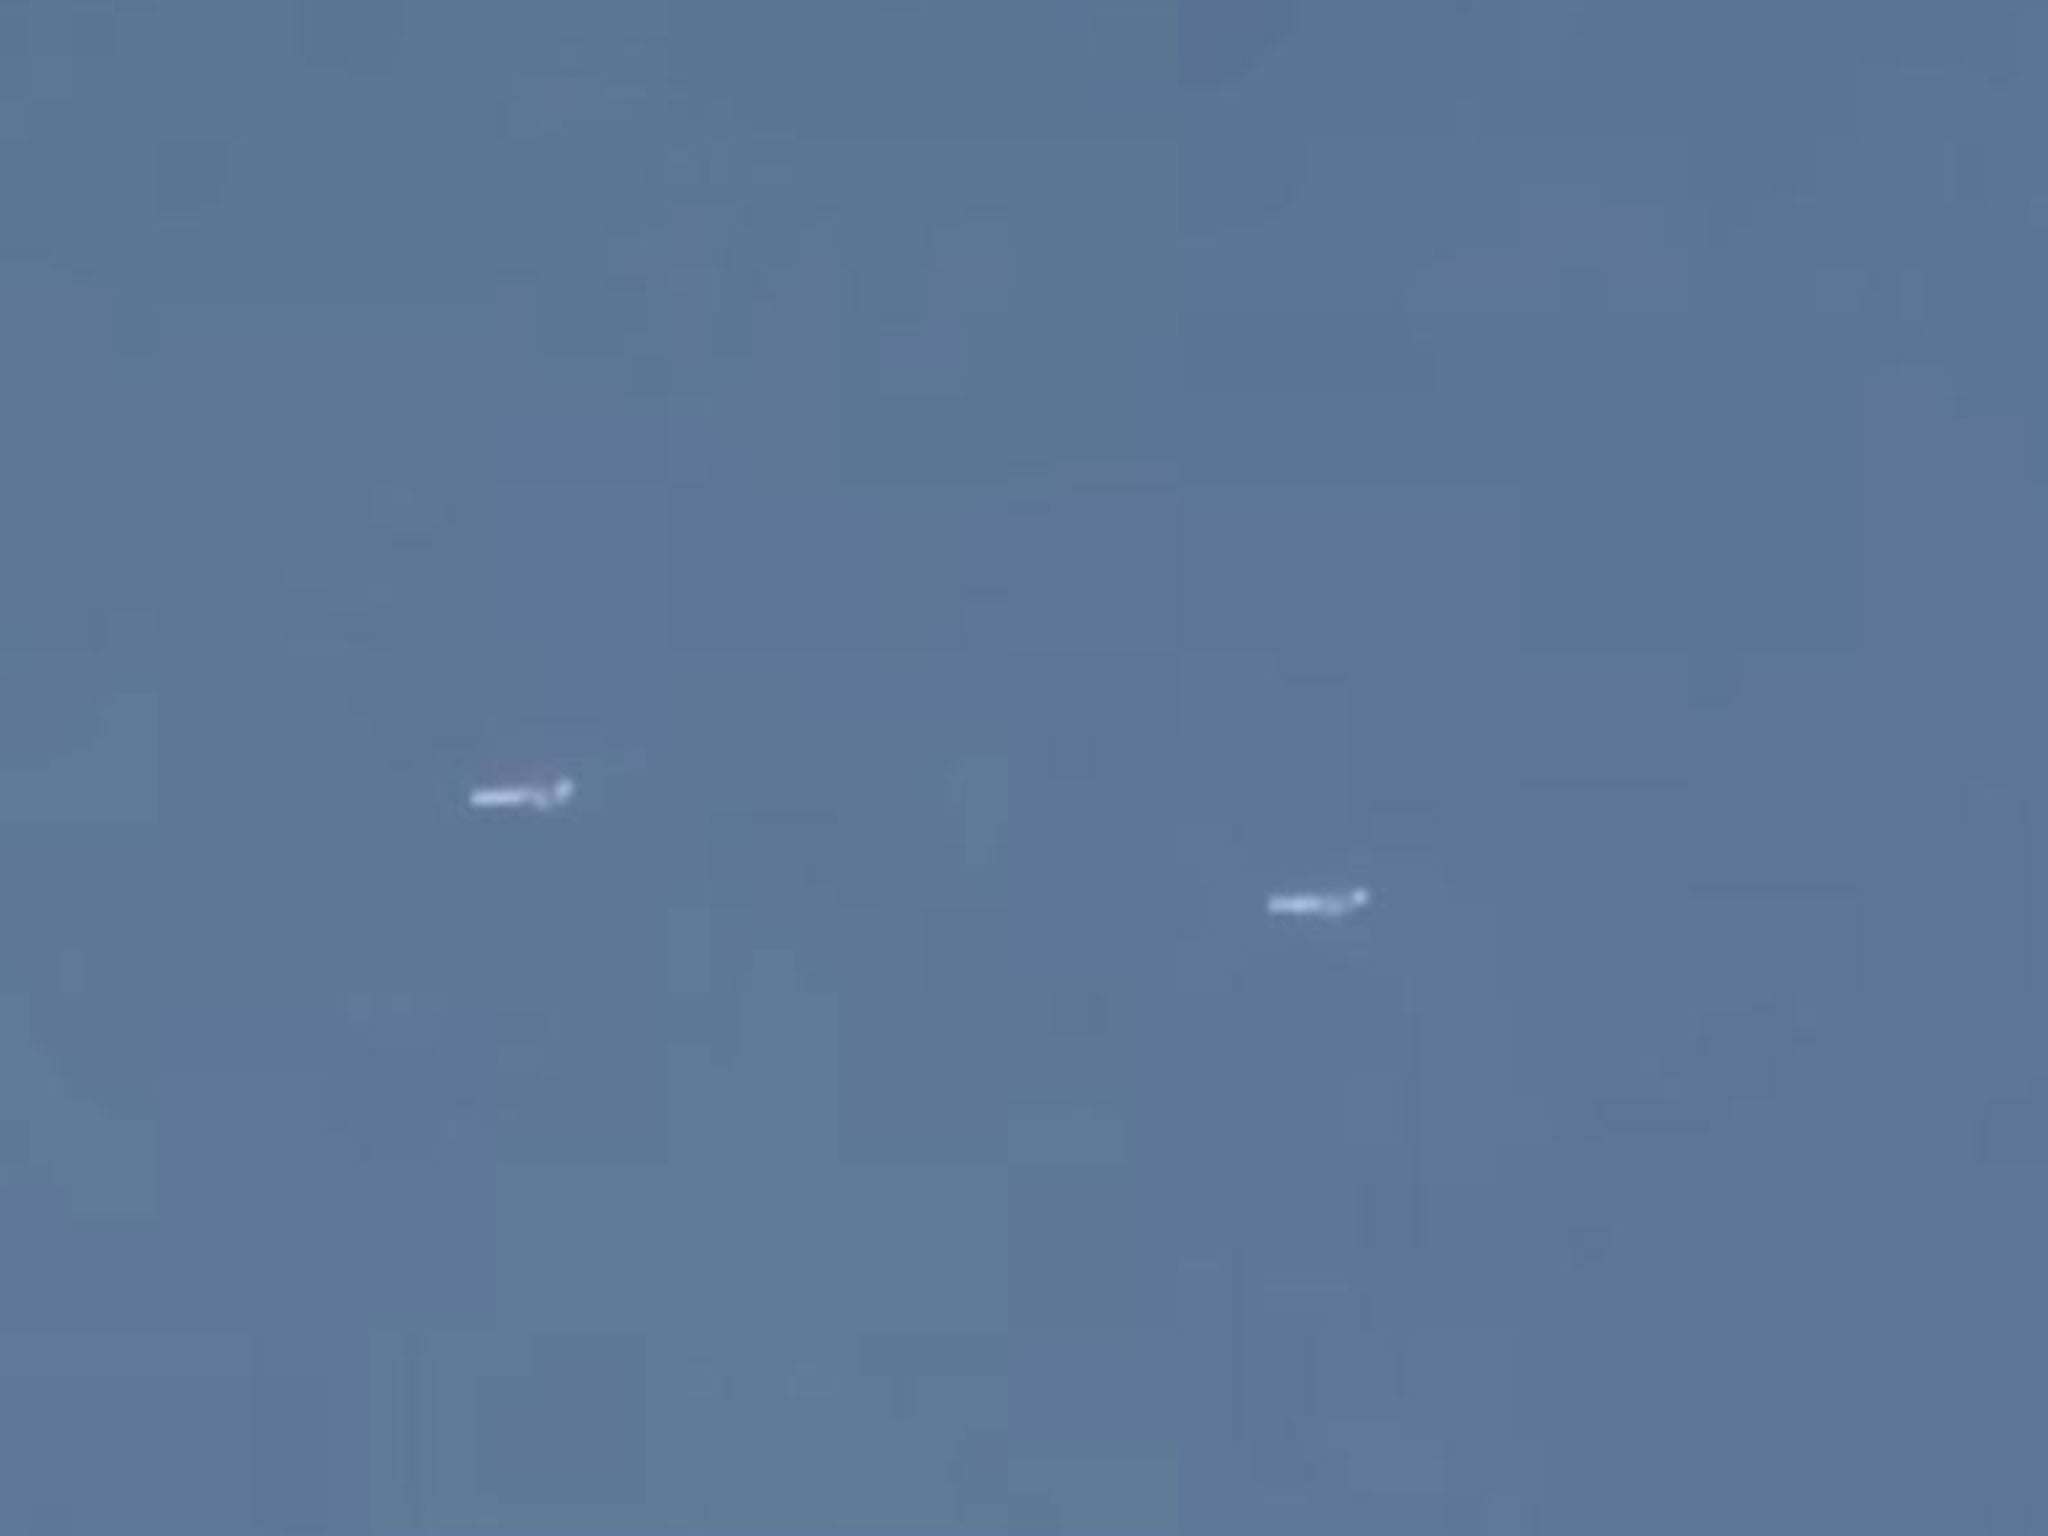 Activists claimed the footage showed Russian planes flying over Syria on 30 September 2015